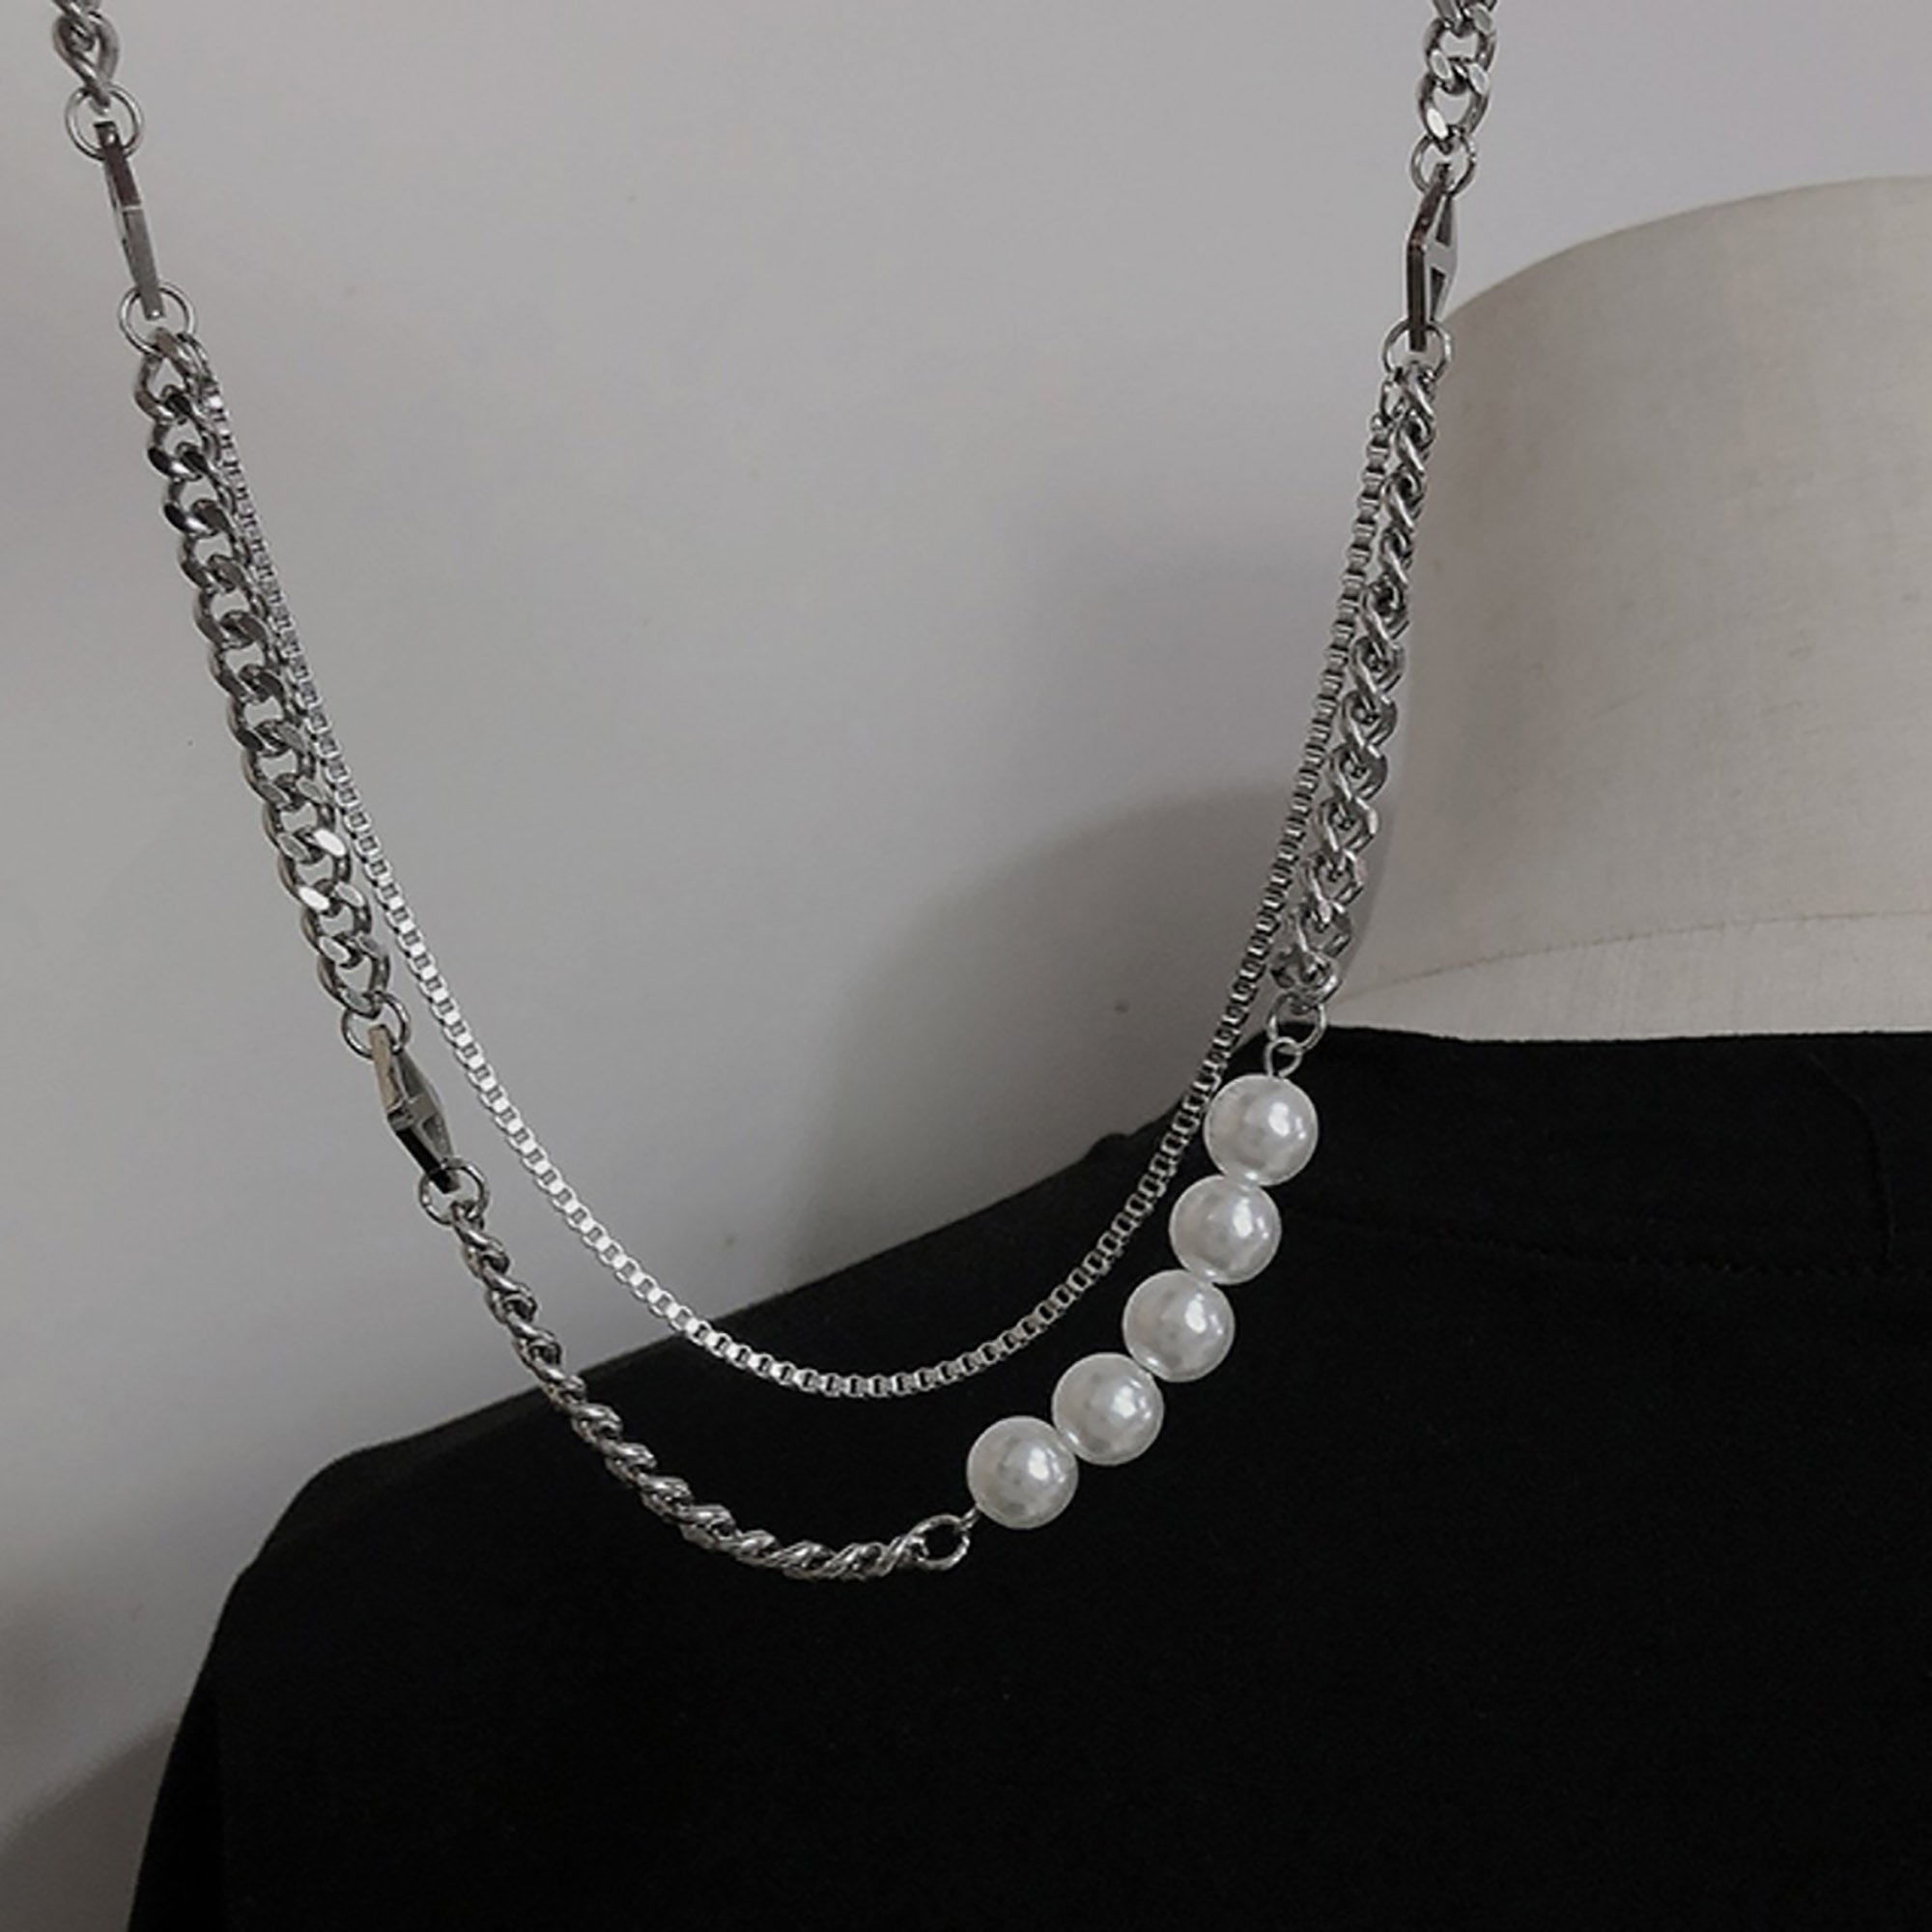 Stainless Steel w/ Pearl 46+6cm Layered Necklace Valentine Day Gift KOL / Youtuber / Celebrity / Fashion Icon styling